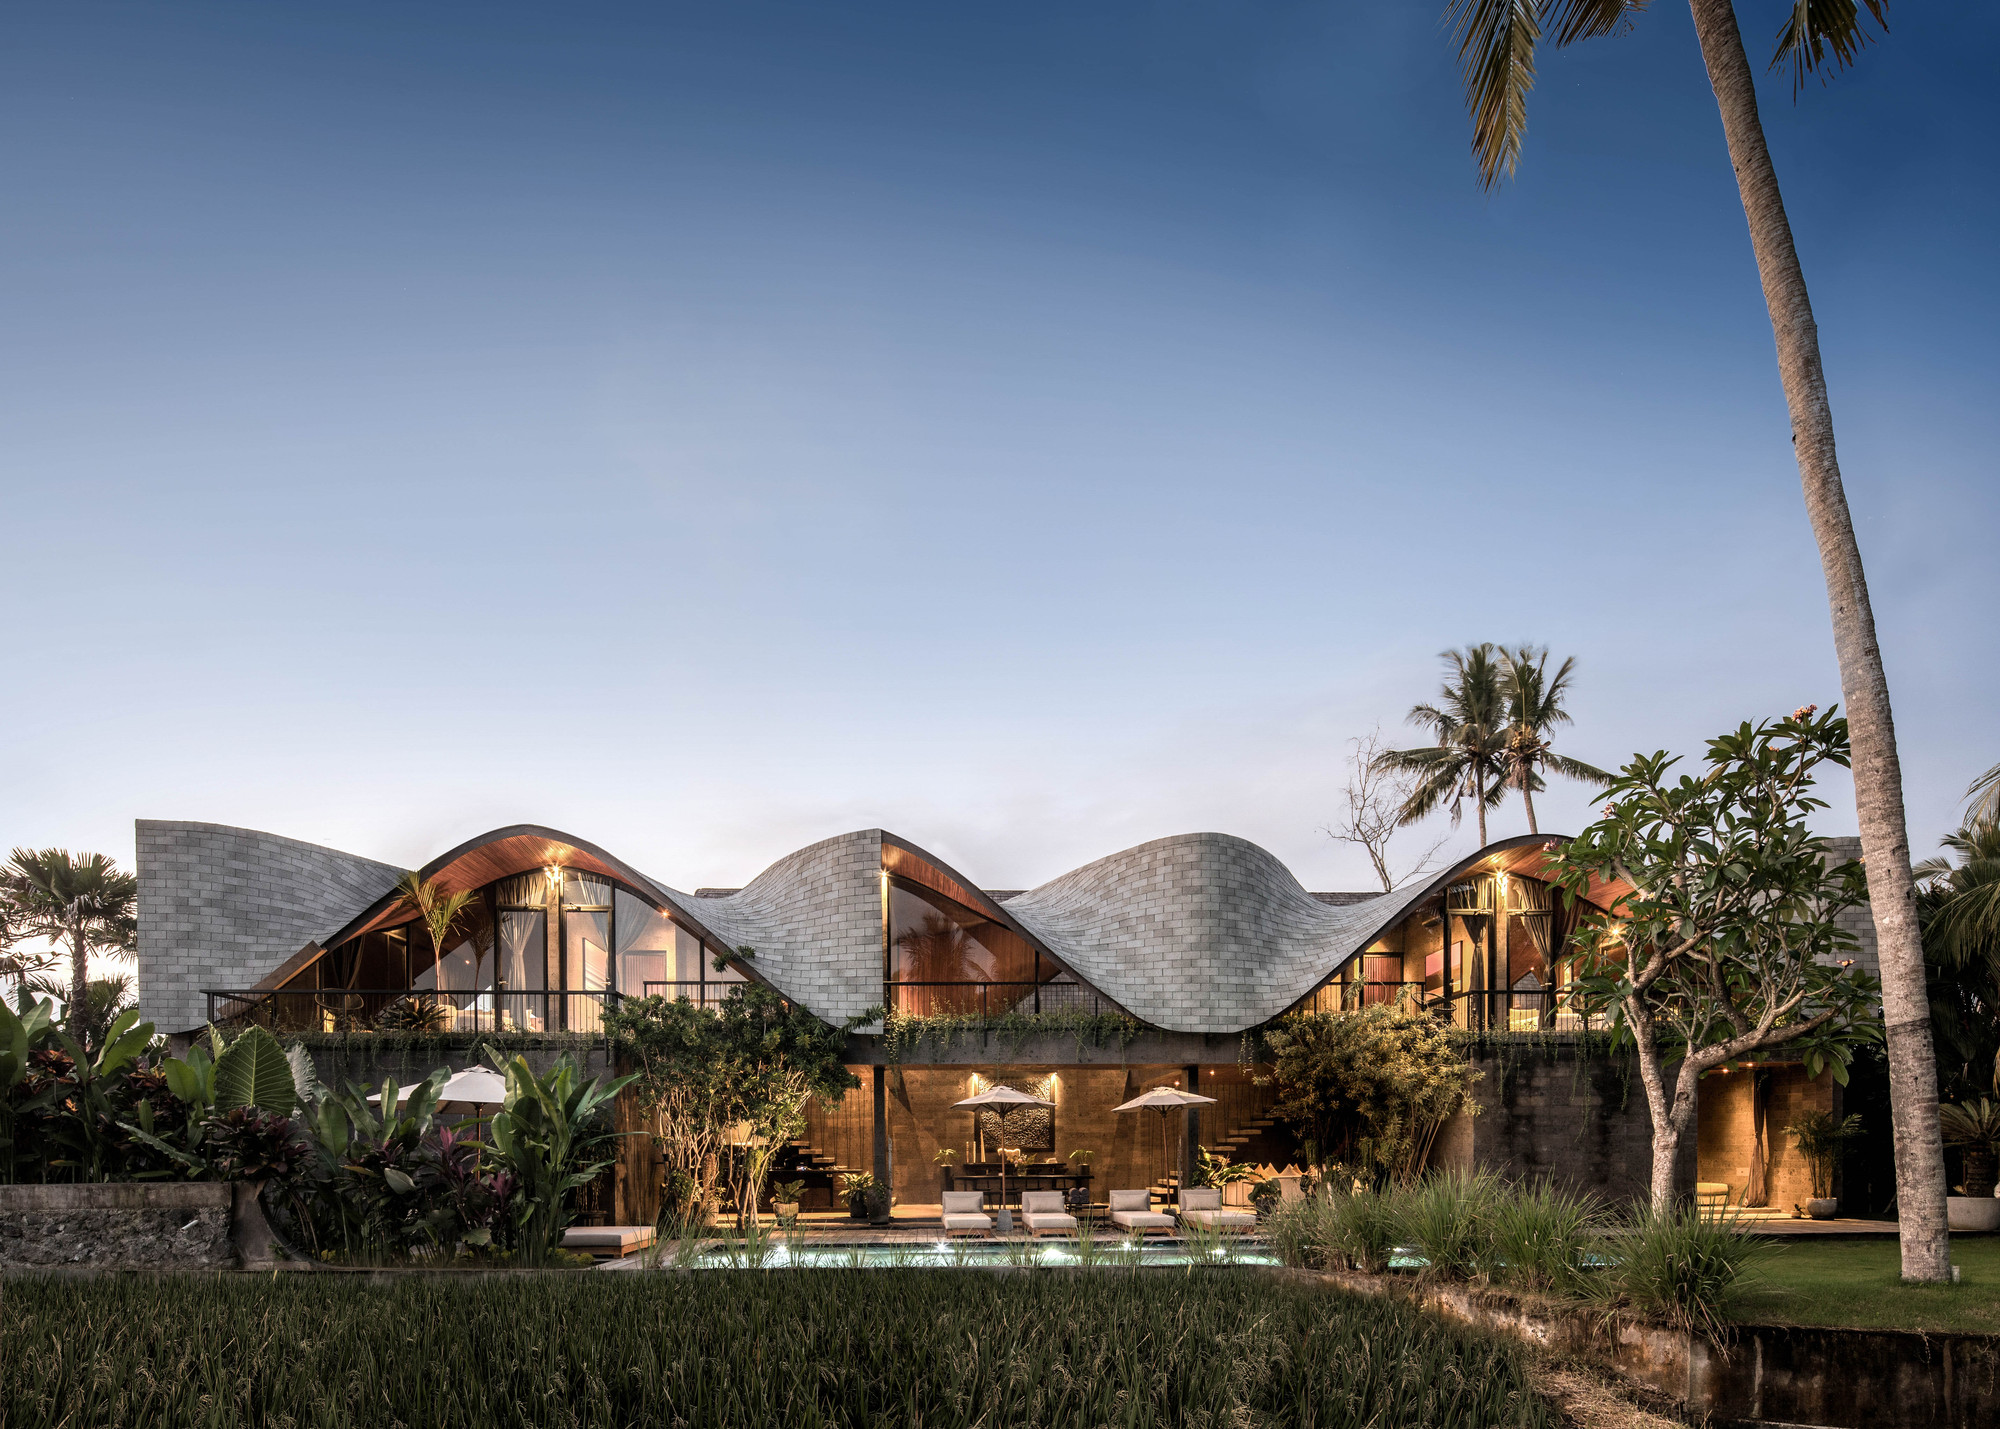 Alpha House is one of Alexis' residential projects located in Ubud, Bali